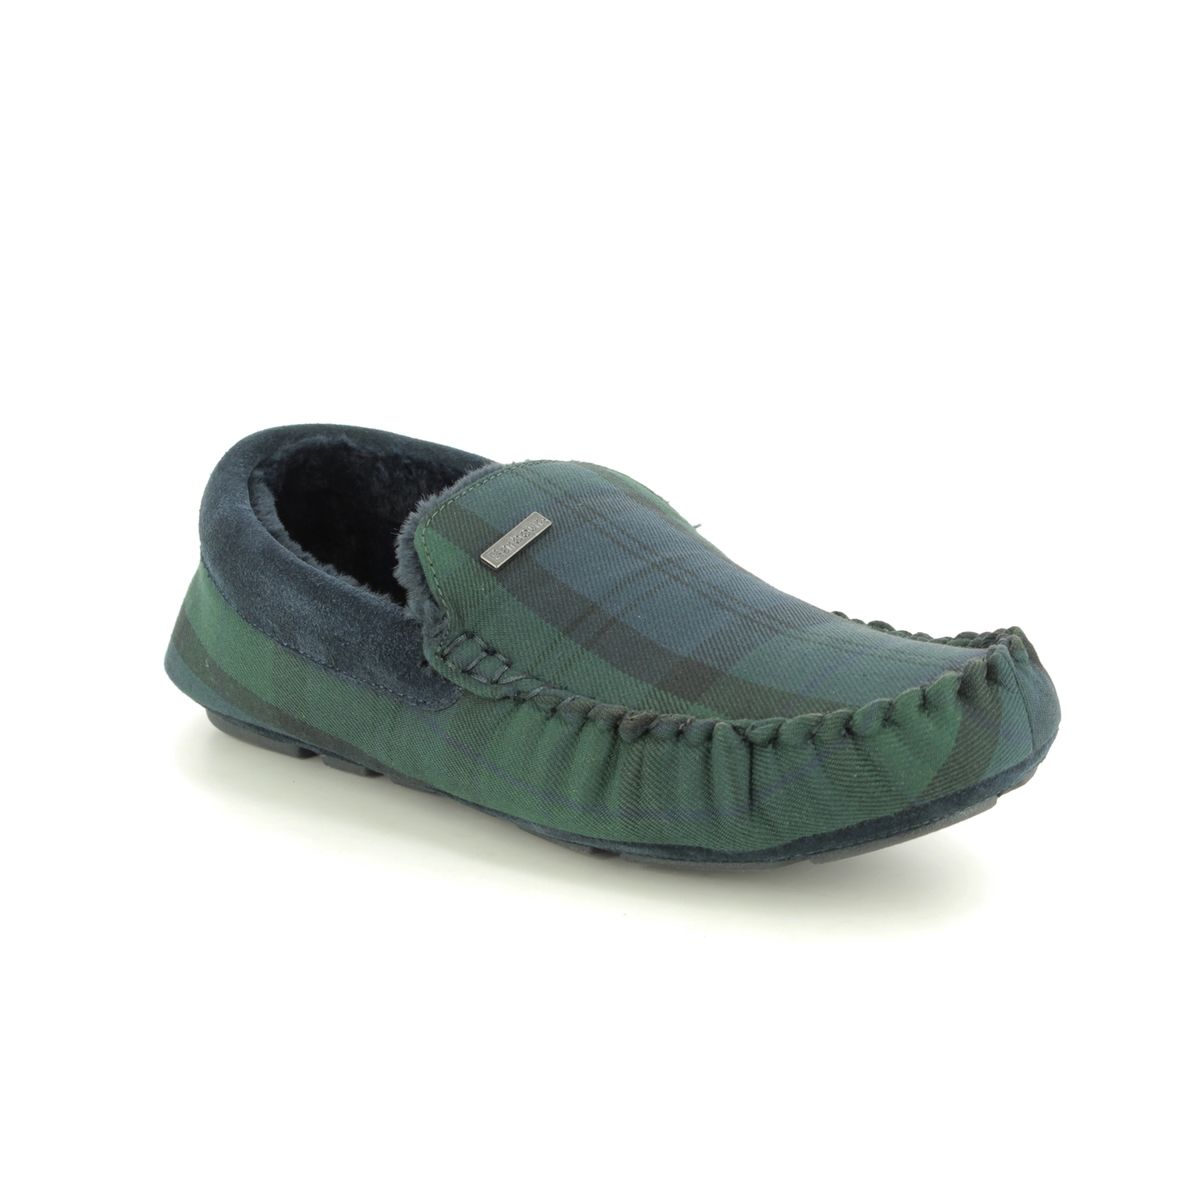 barbour slip on shoes